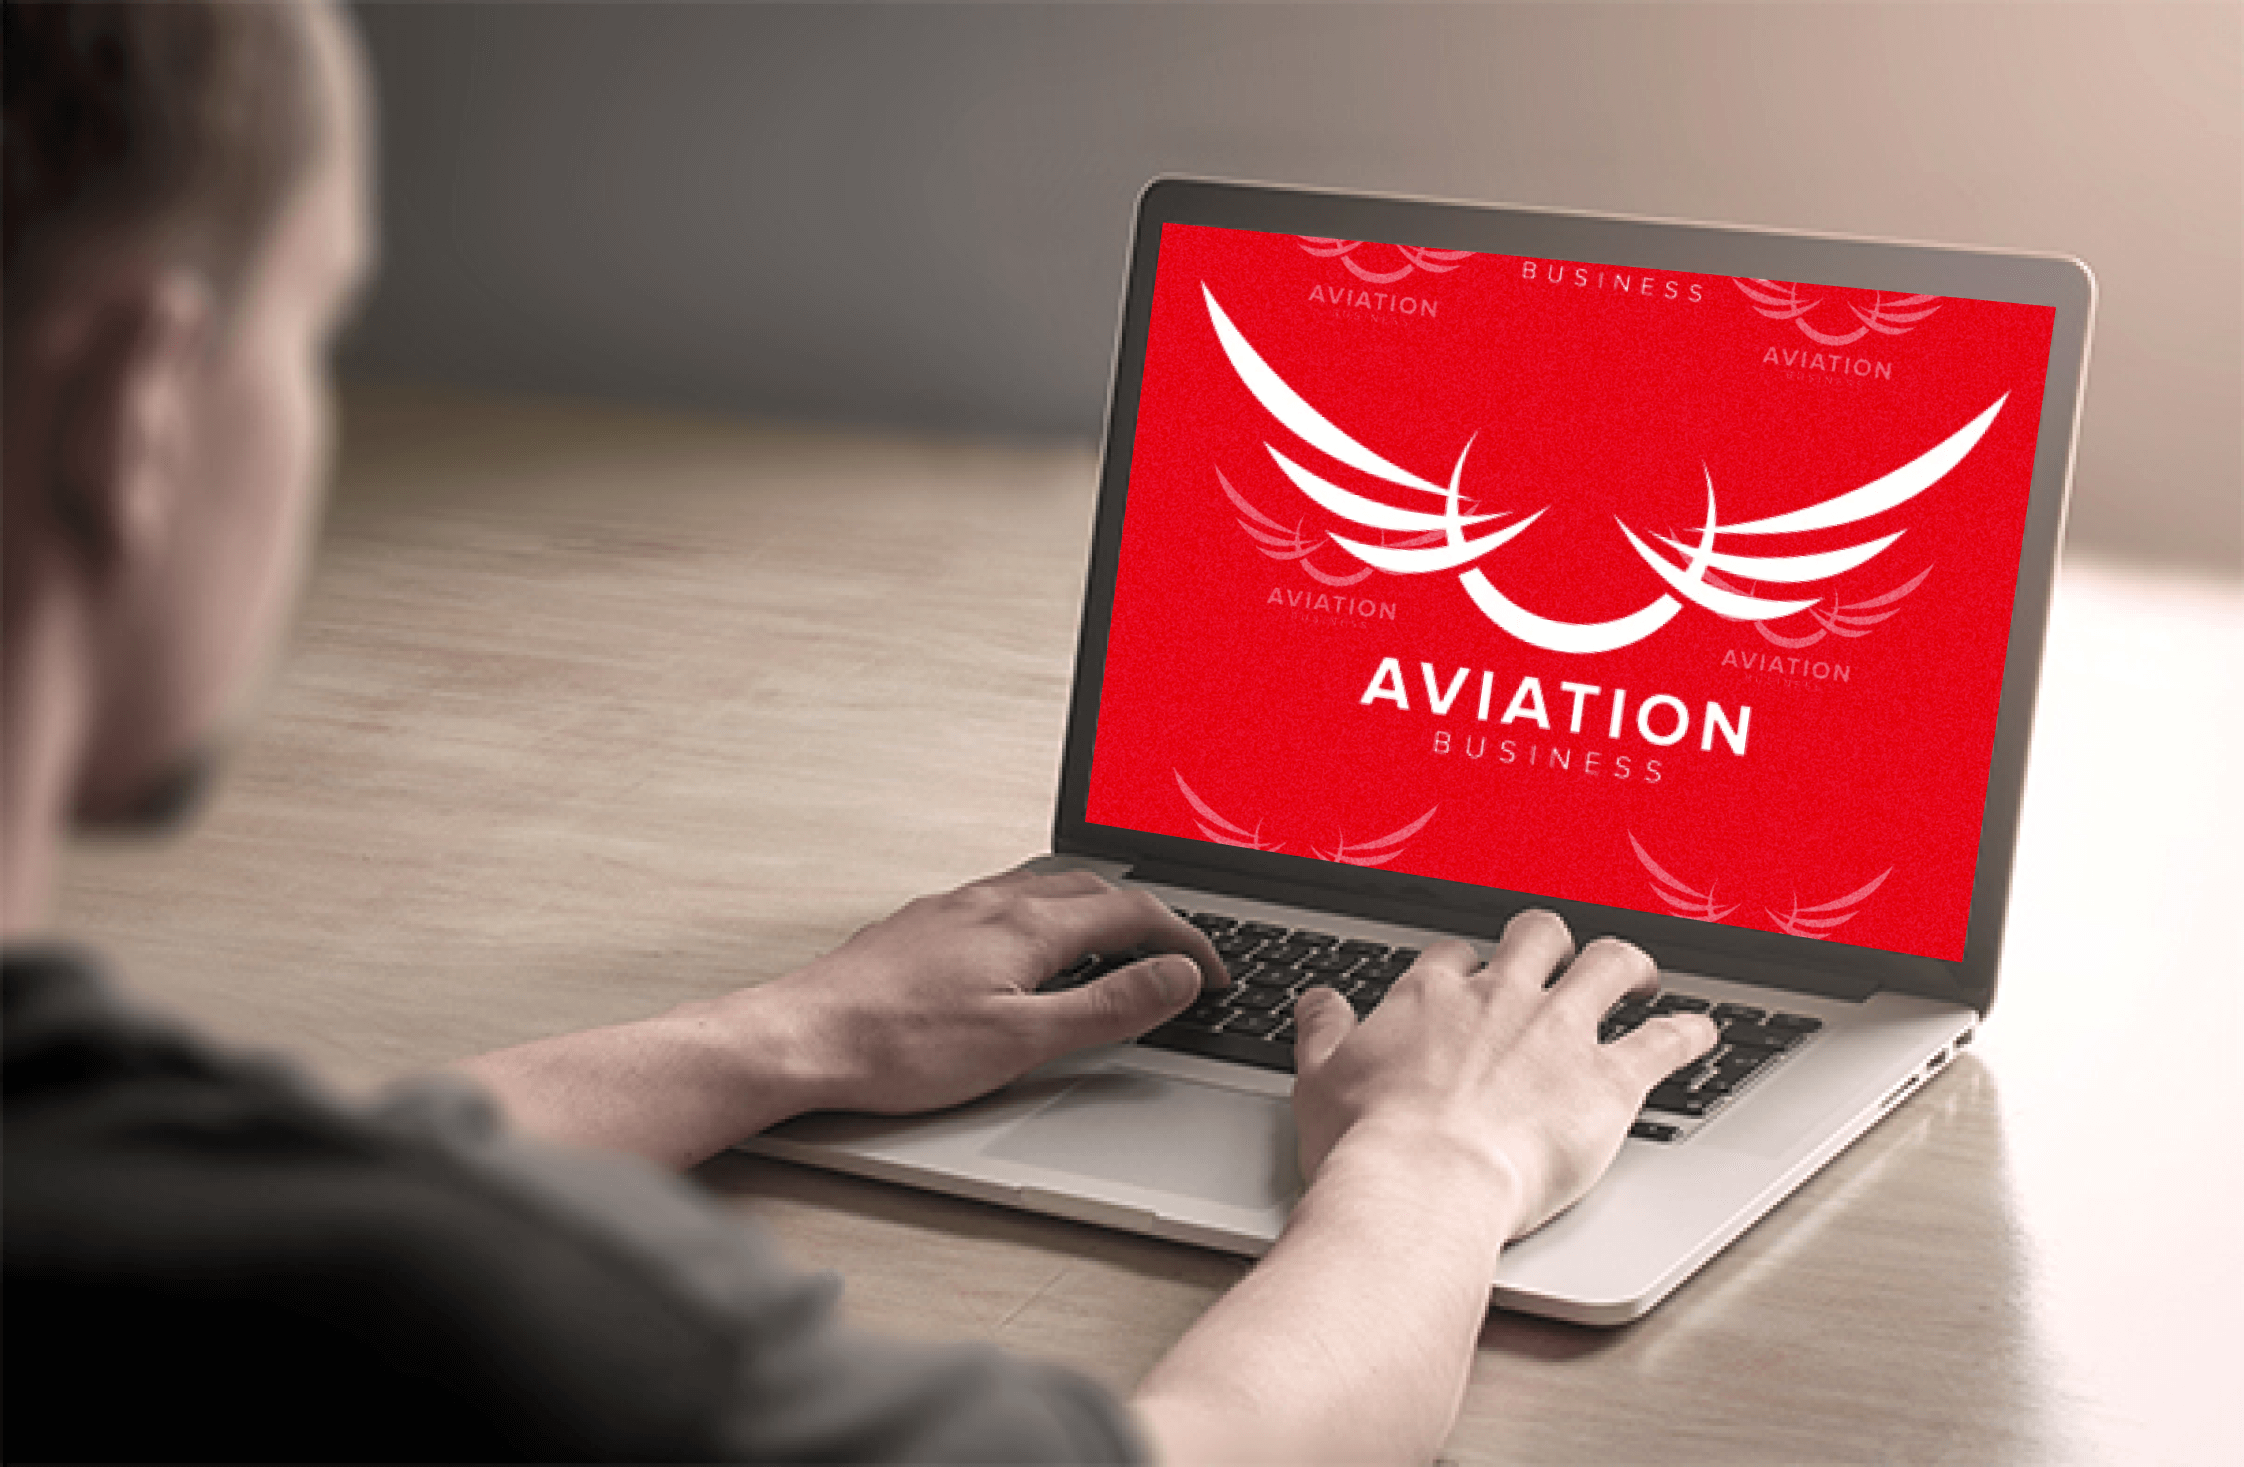 Wing airlines concept design on laptop.